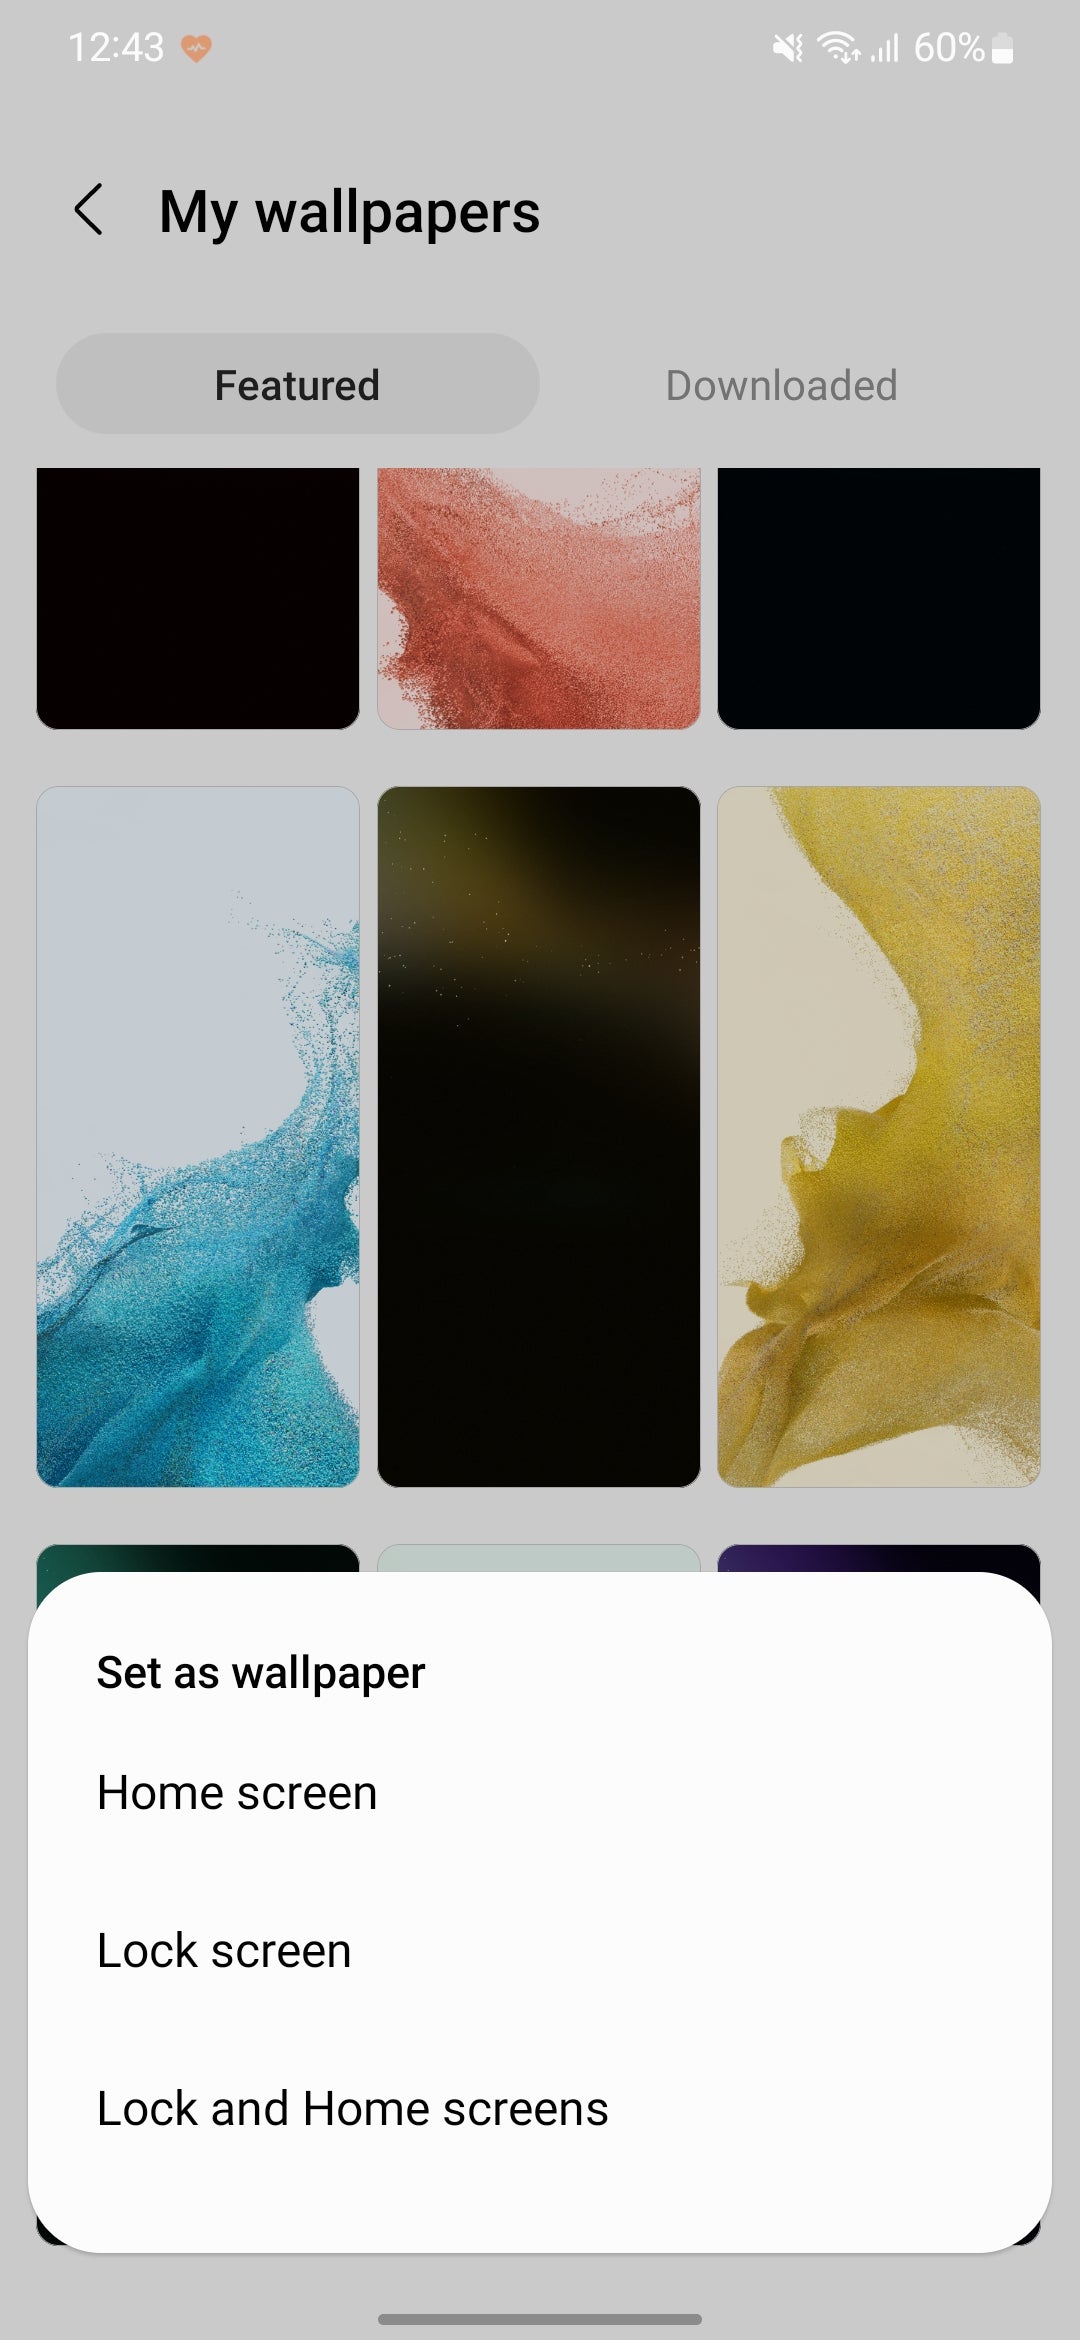 How to change the wallpaper on your Samsung Galaxy phone